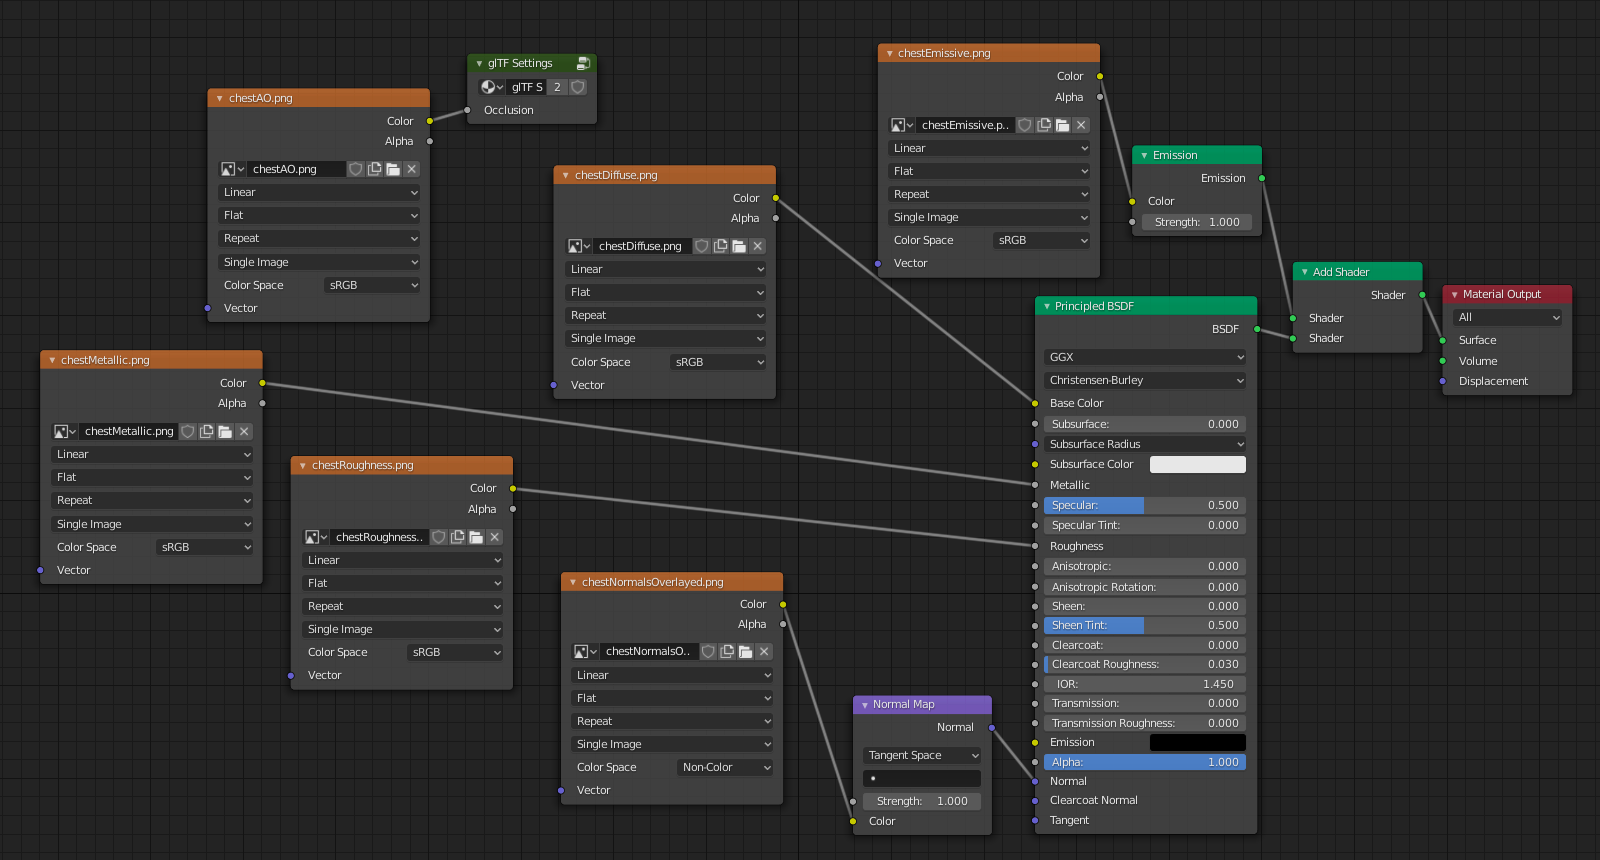 All the nodes needed to configure the Principled BSDF material